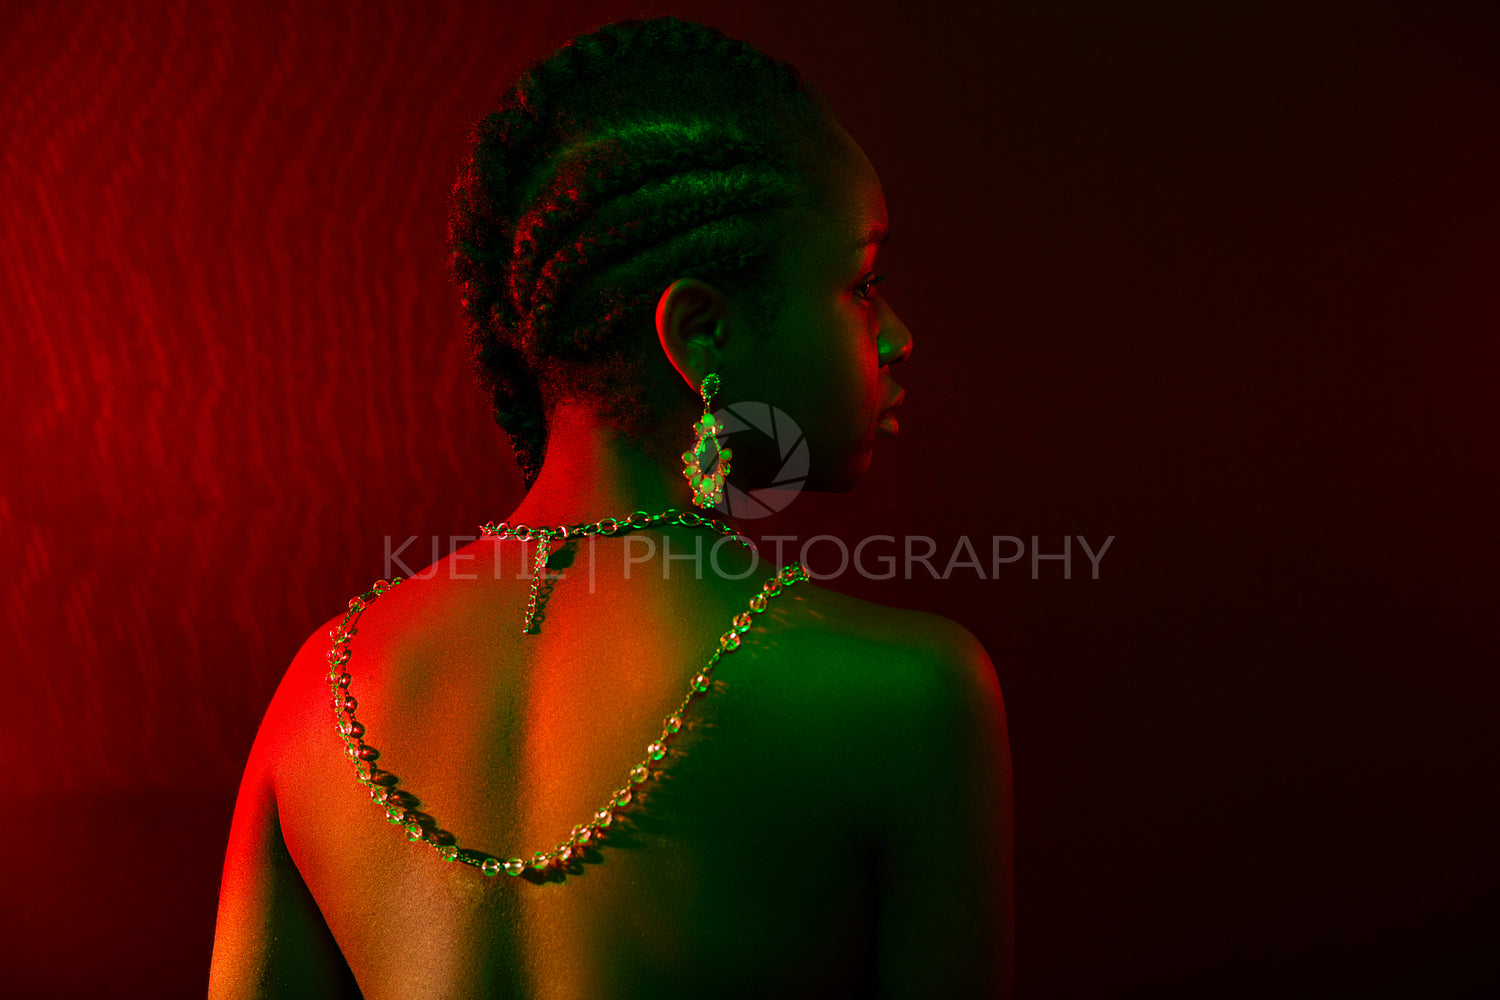 Colorful and creative portrait of pensive african womans back with dark skin